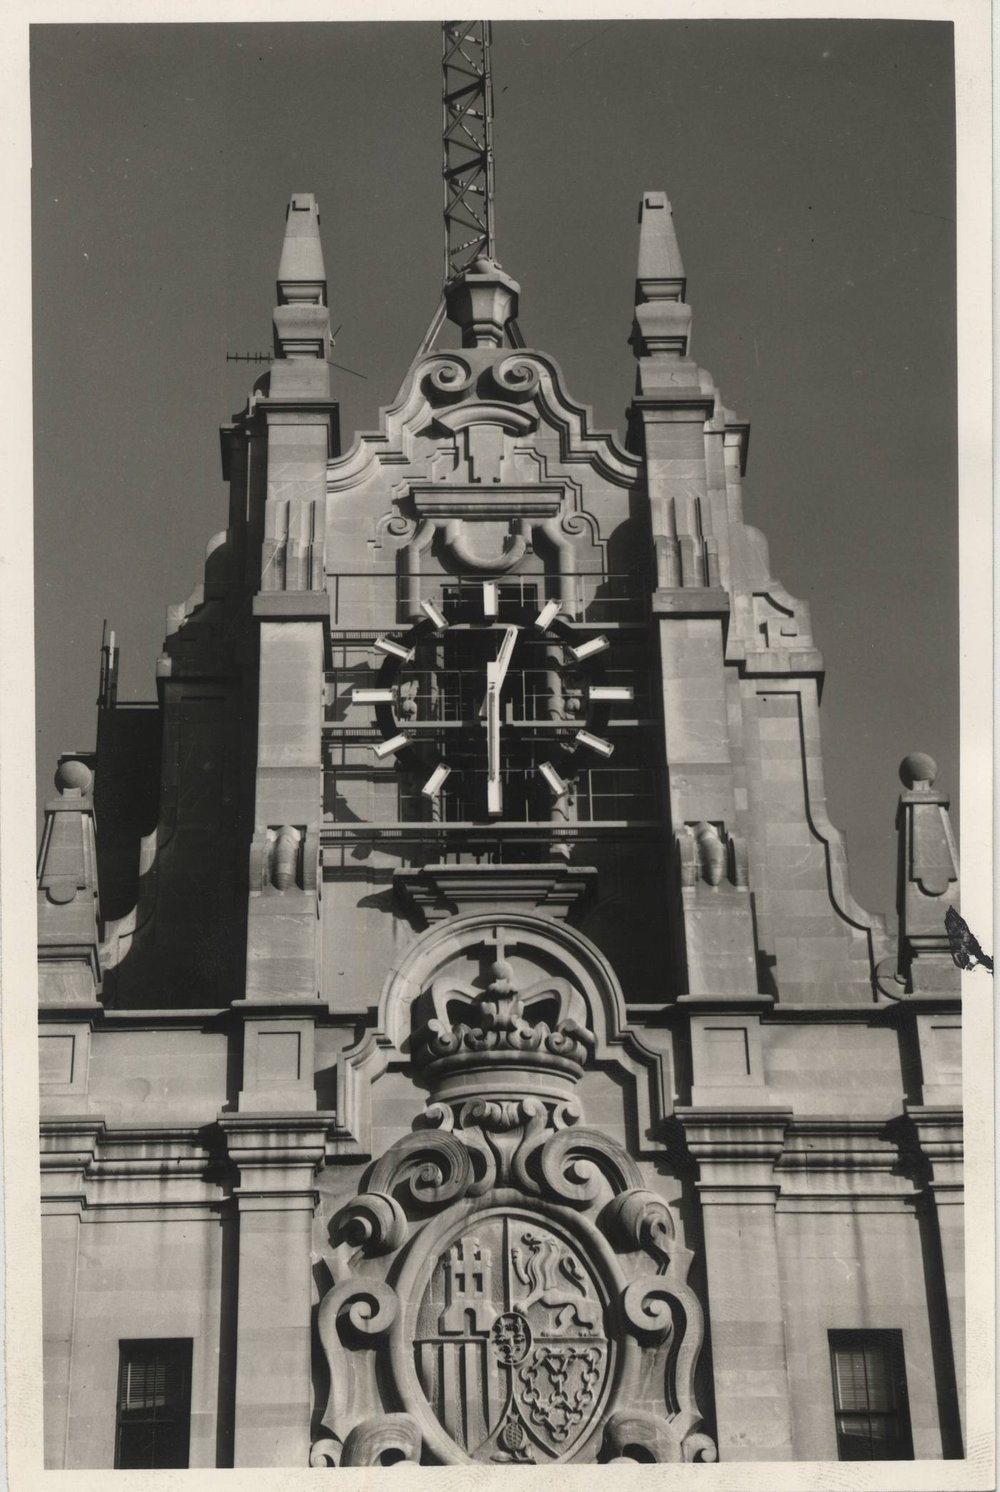 CLOCK ON THE TOWER OF THE GRAN VÍA TELEPHONE BUILDING